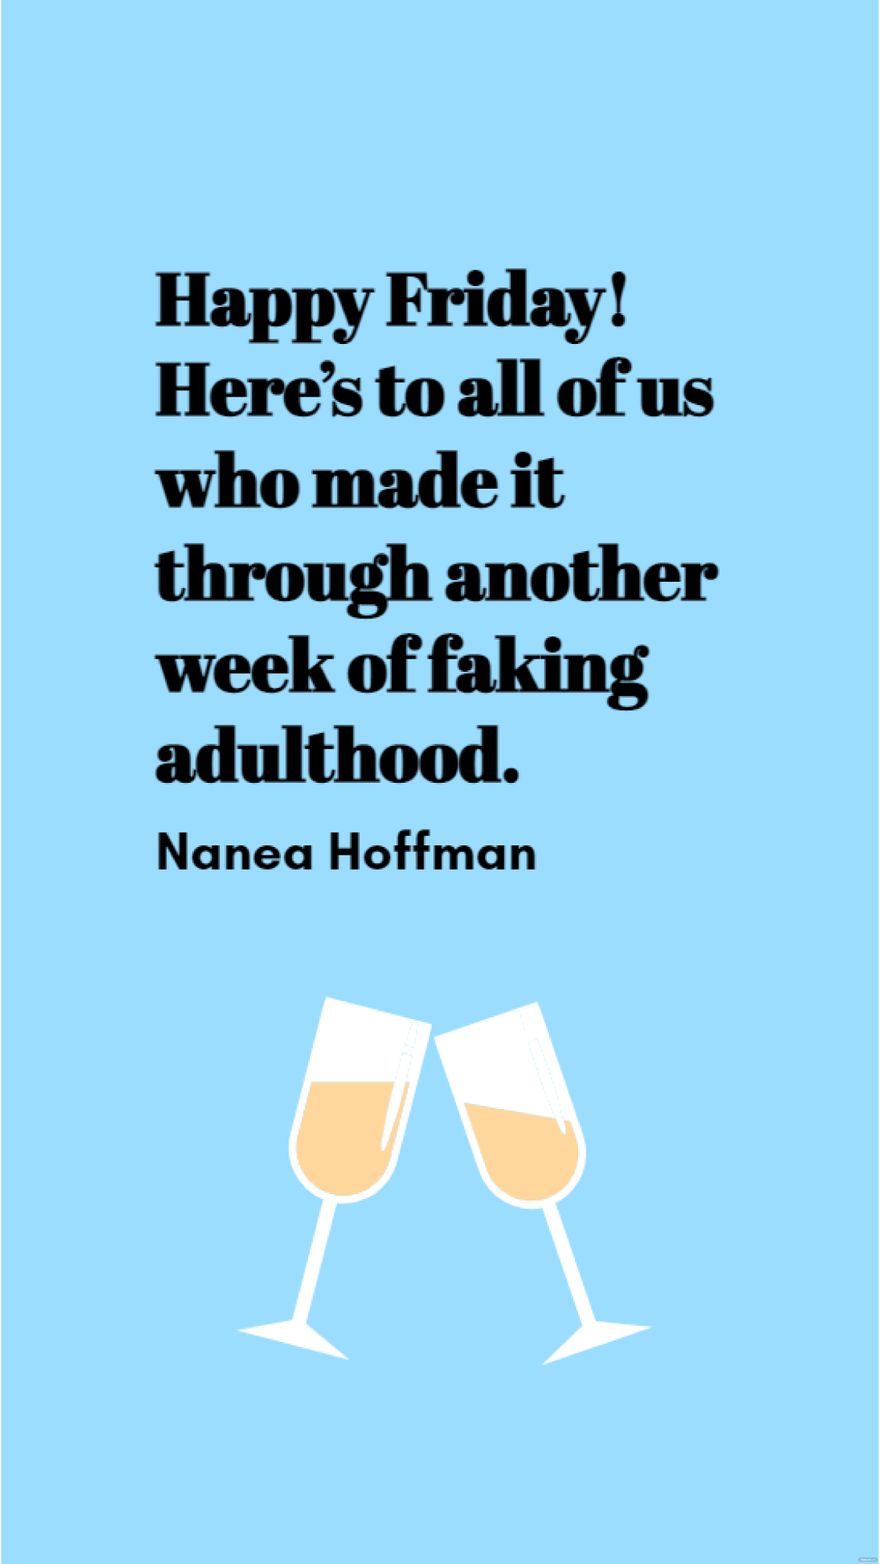 Nanea Hoffman - Happy Friday! Here’s to all of us who made it through another week of faking adulthood.